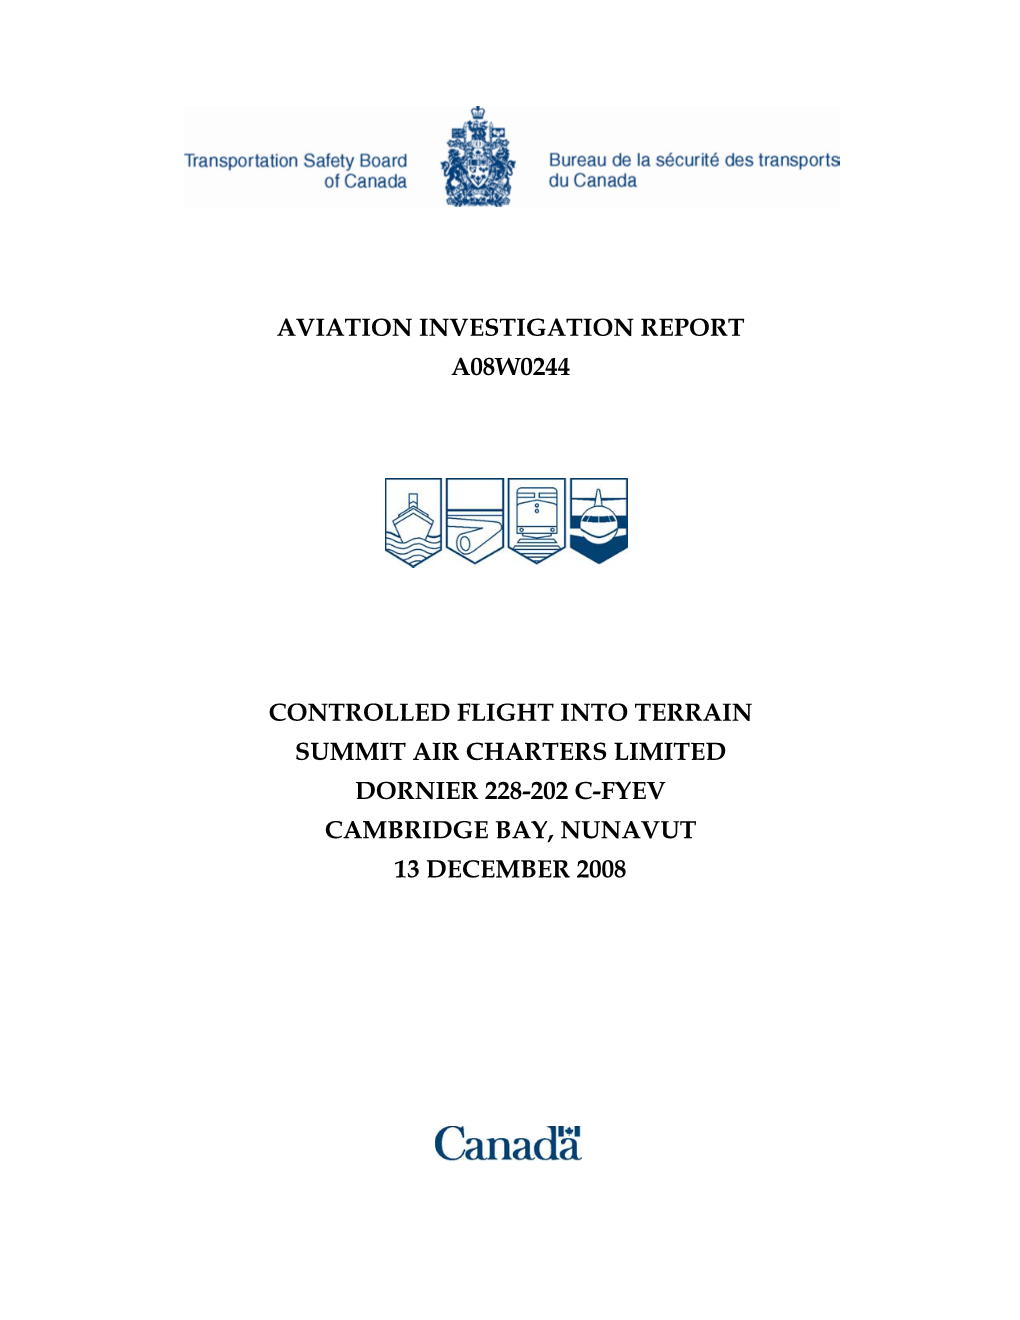 Aviation Investigation Report A08w0244 Controlled Flight